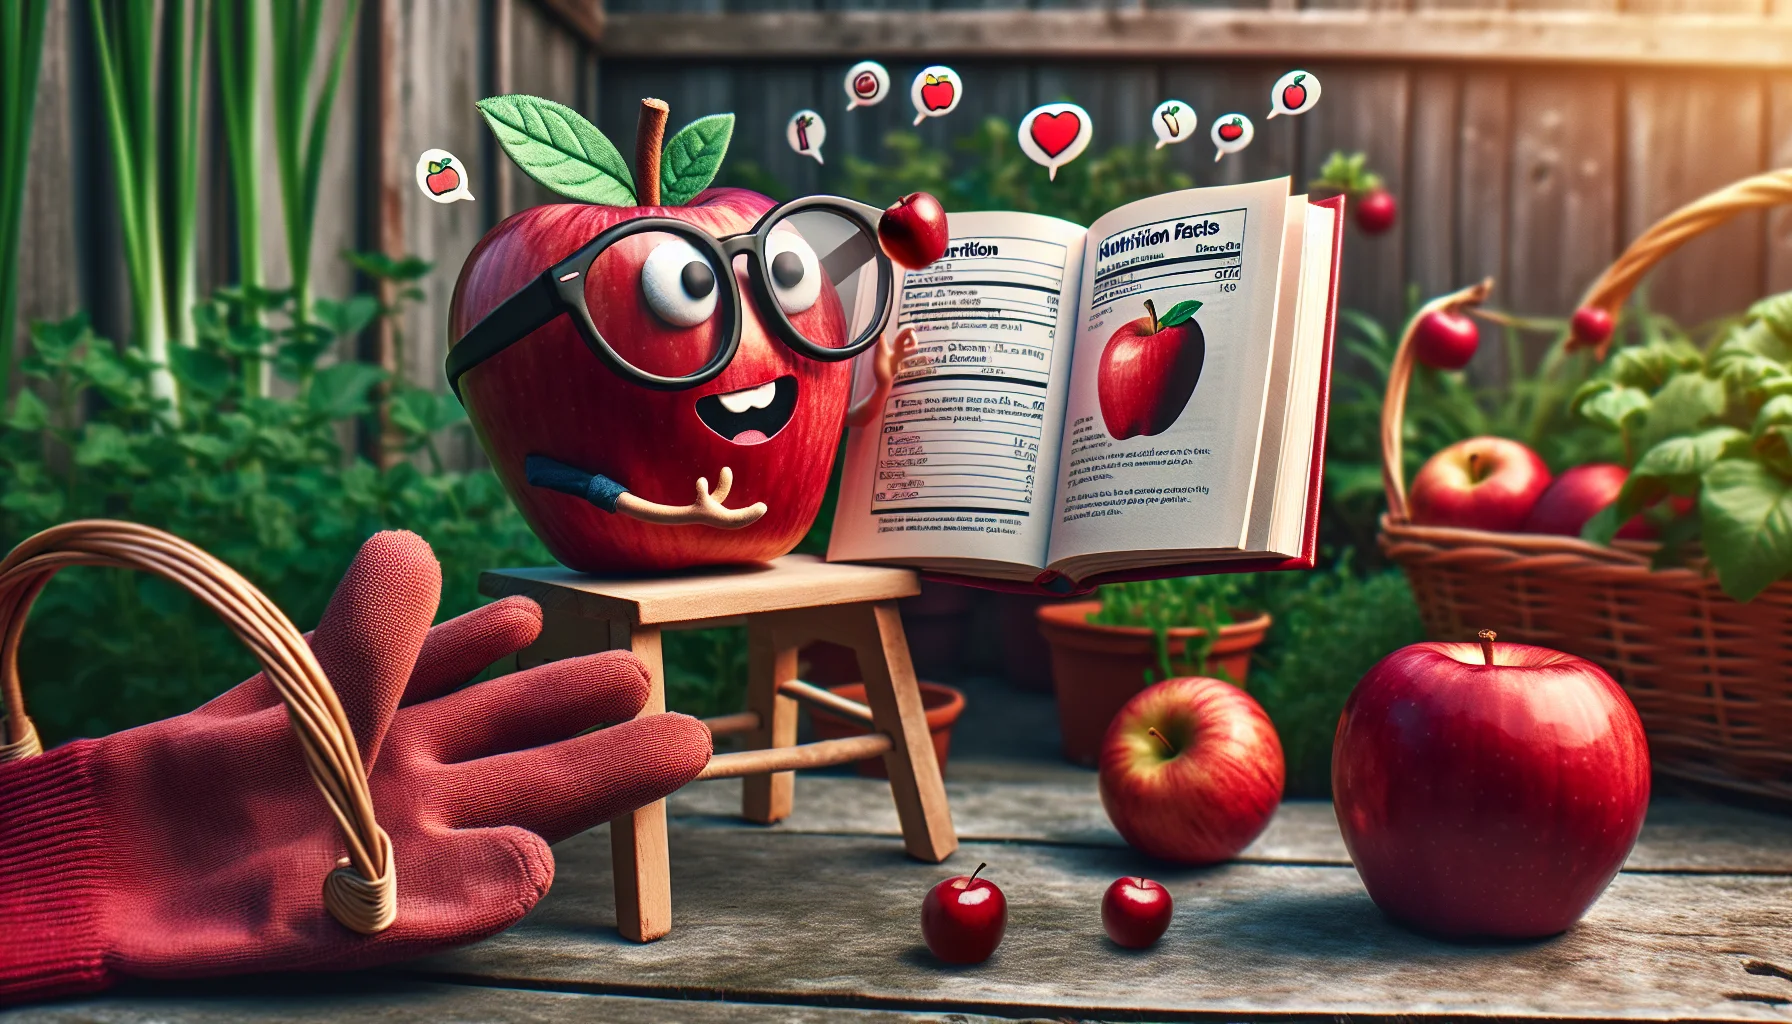 Create a humorously engaging scenario illustrating the nutritional benefits of red apples. Picture this, a head-sized red apple wearing reading glasses and a charming smile, reading a book titled 'The Benefits of Being an Apple'. Drawing from the book, it displays its nutrition facts in the form of cute miniature icons hovering around it. Meanwhile, a gardening glove is seen aspirationally reaching towards it from afar, longing for the vibrant, healthy apple. Sitting on a garden stool, the environment around the apple is filled with lush green vegetation, and a basket full of freshly harvested red apples nearby, encouraging and promoting the delightful hobby of gardening.